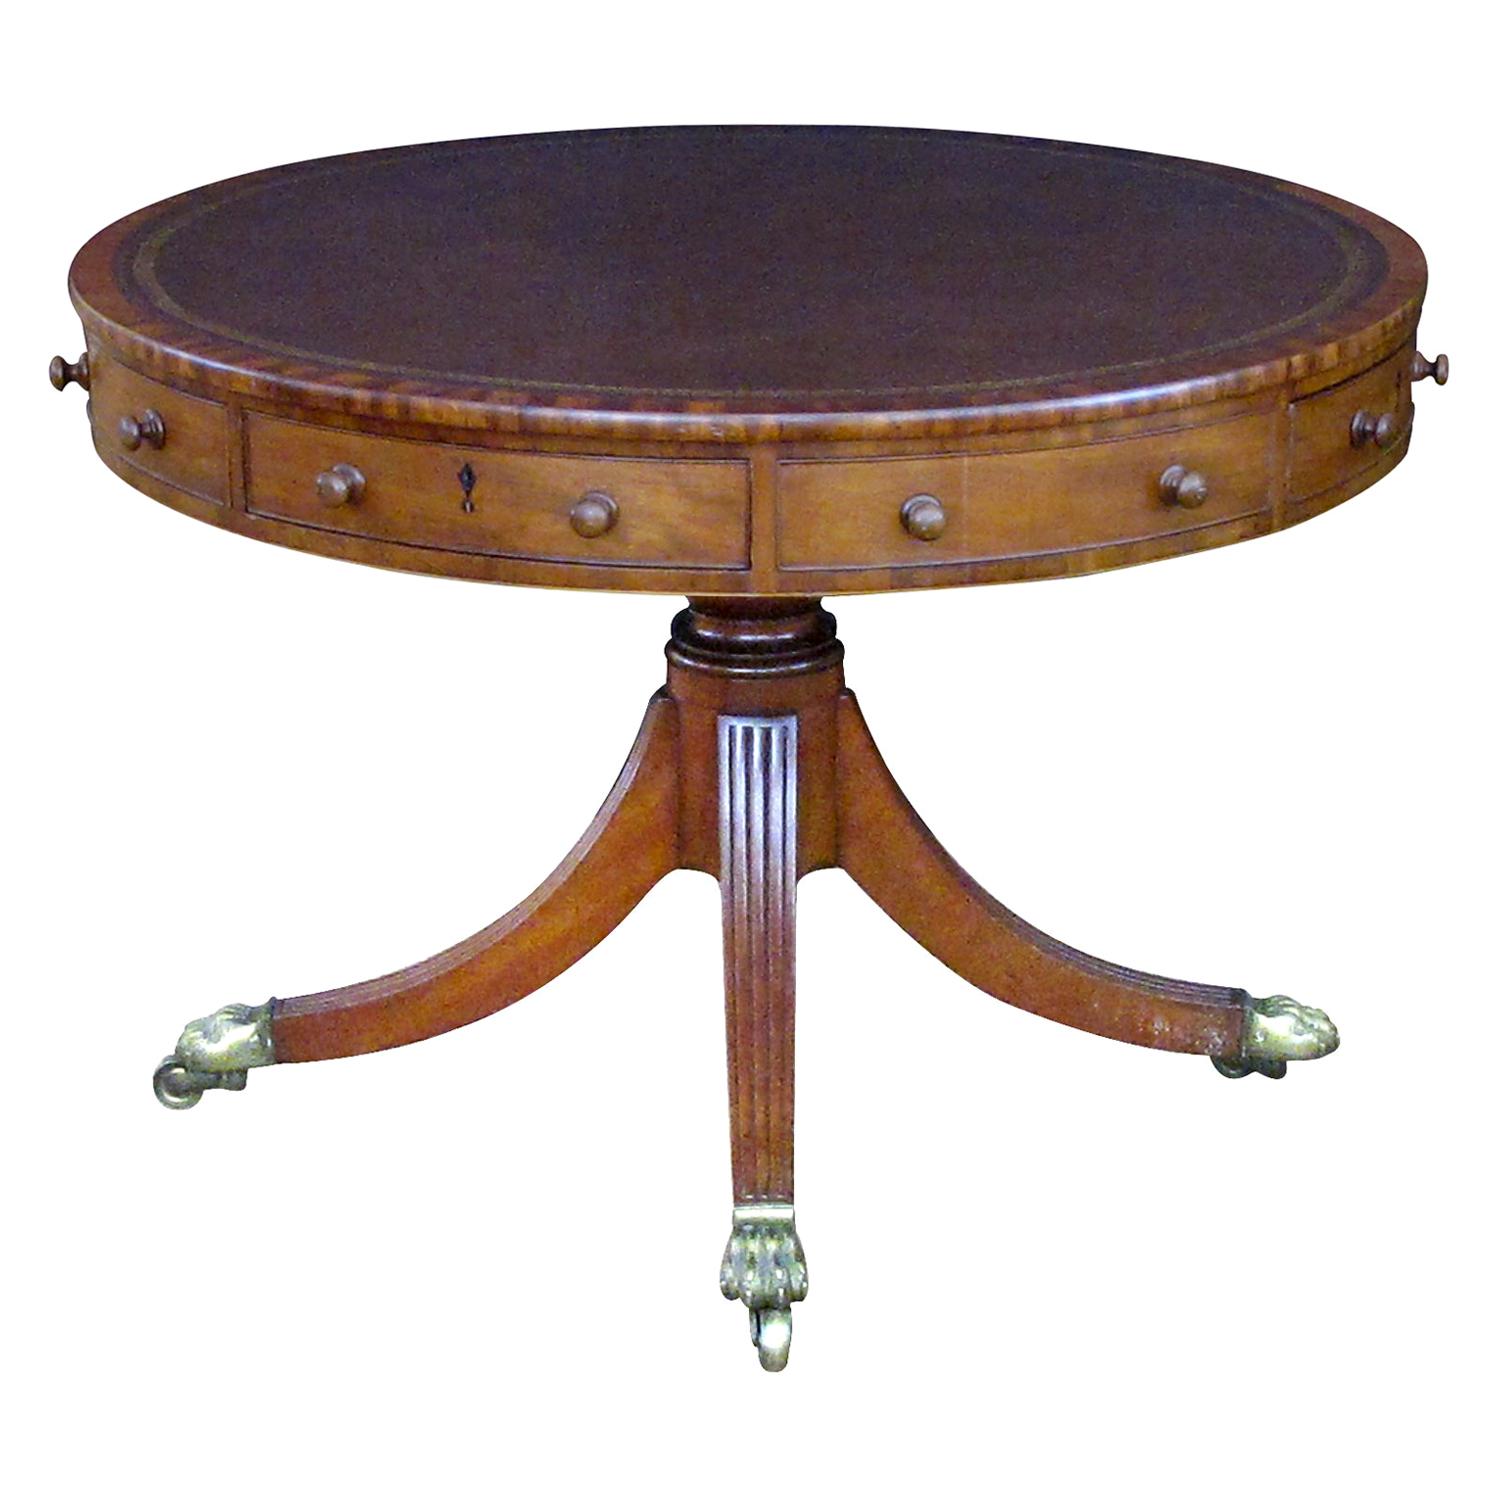 Handsome English Regency Mahogany Centre/Rent Table with Embossed Leather Top